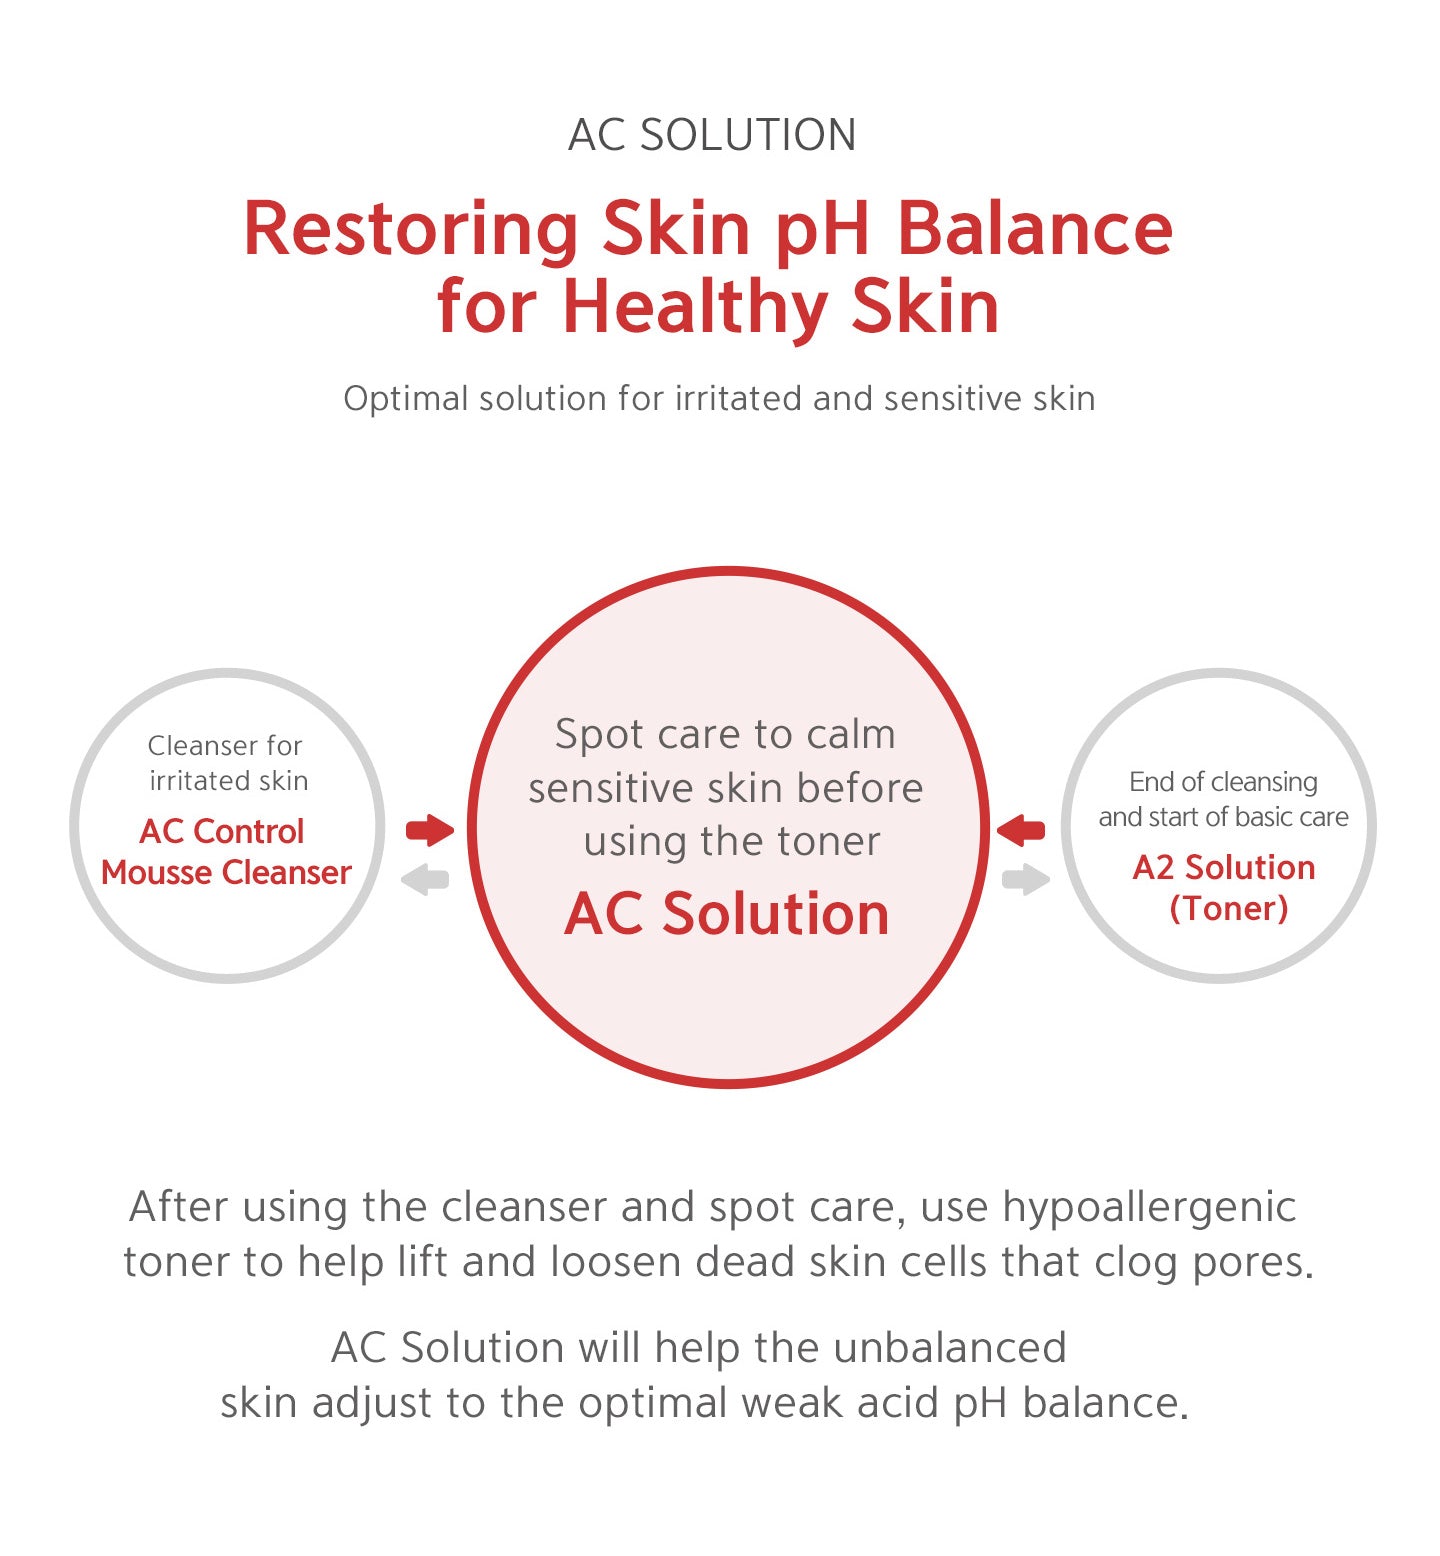 Restoring skin pH balance for healthy skin. After using the cleanser and spot care, use hypoallergenic toner to help lift and loosen dead skin cells that clog pores. AC solution will help the unbalanced skin adjust to the optimal weak acid pH balance. 